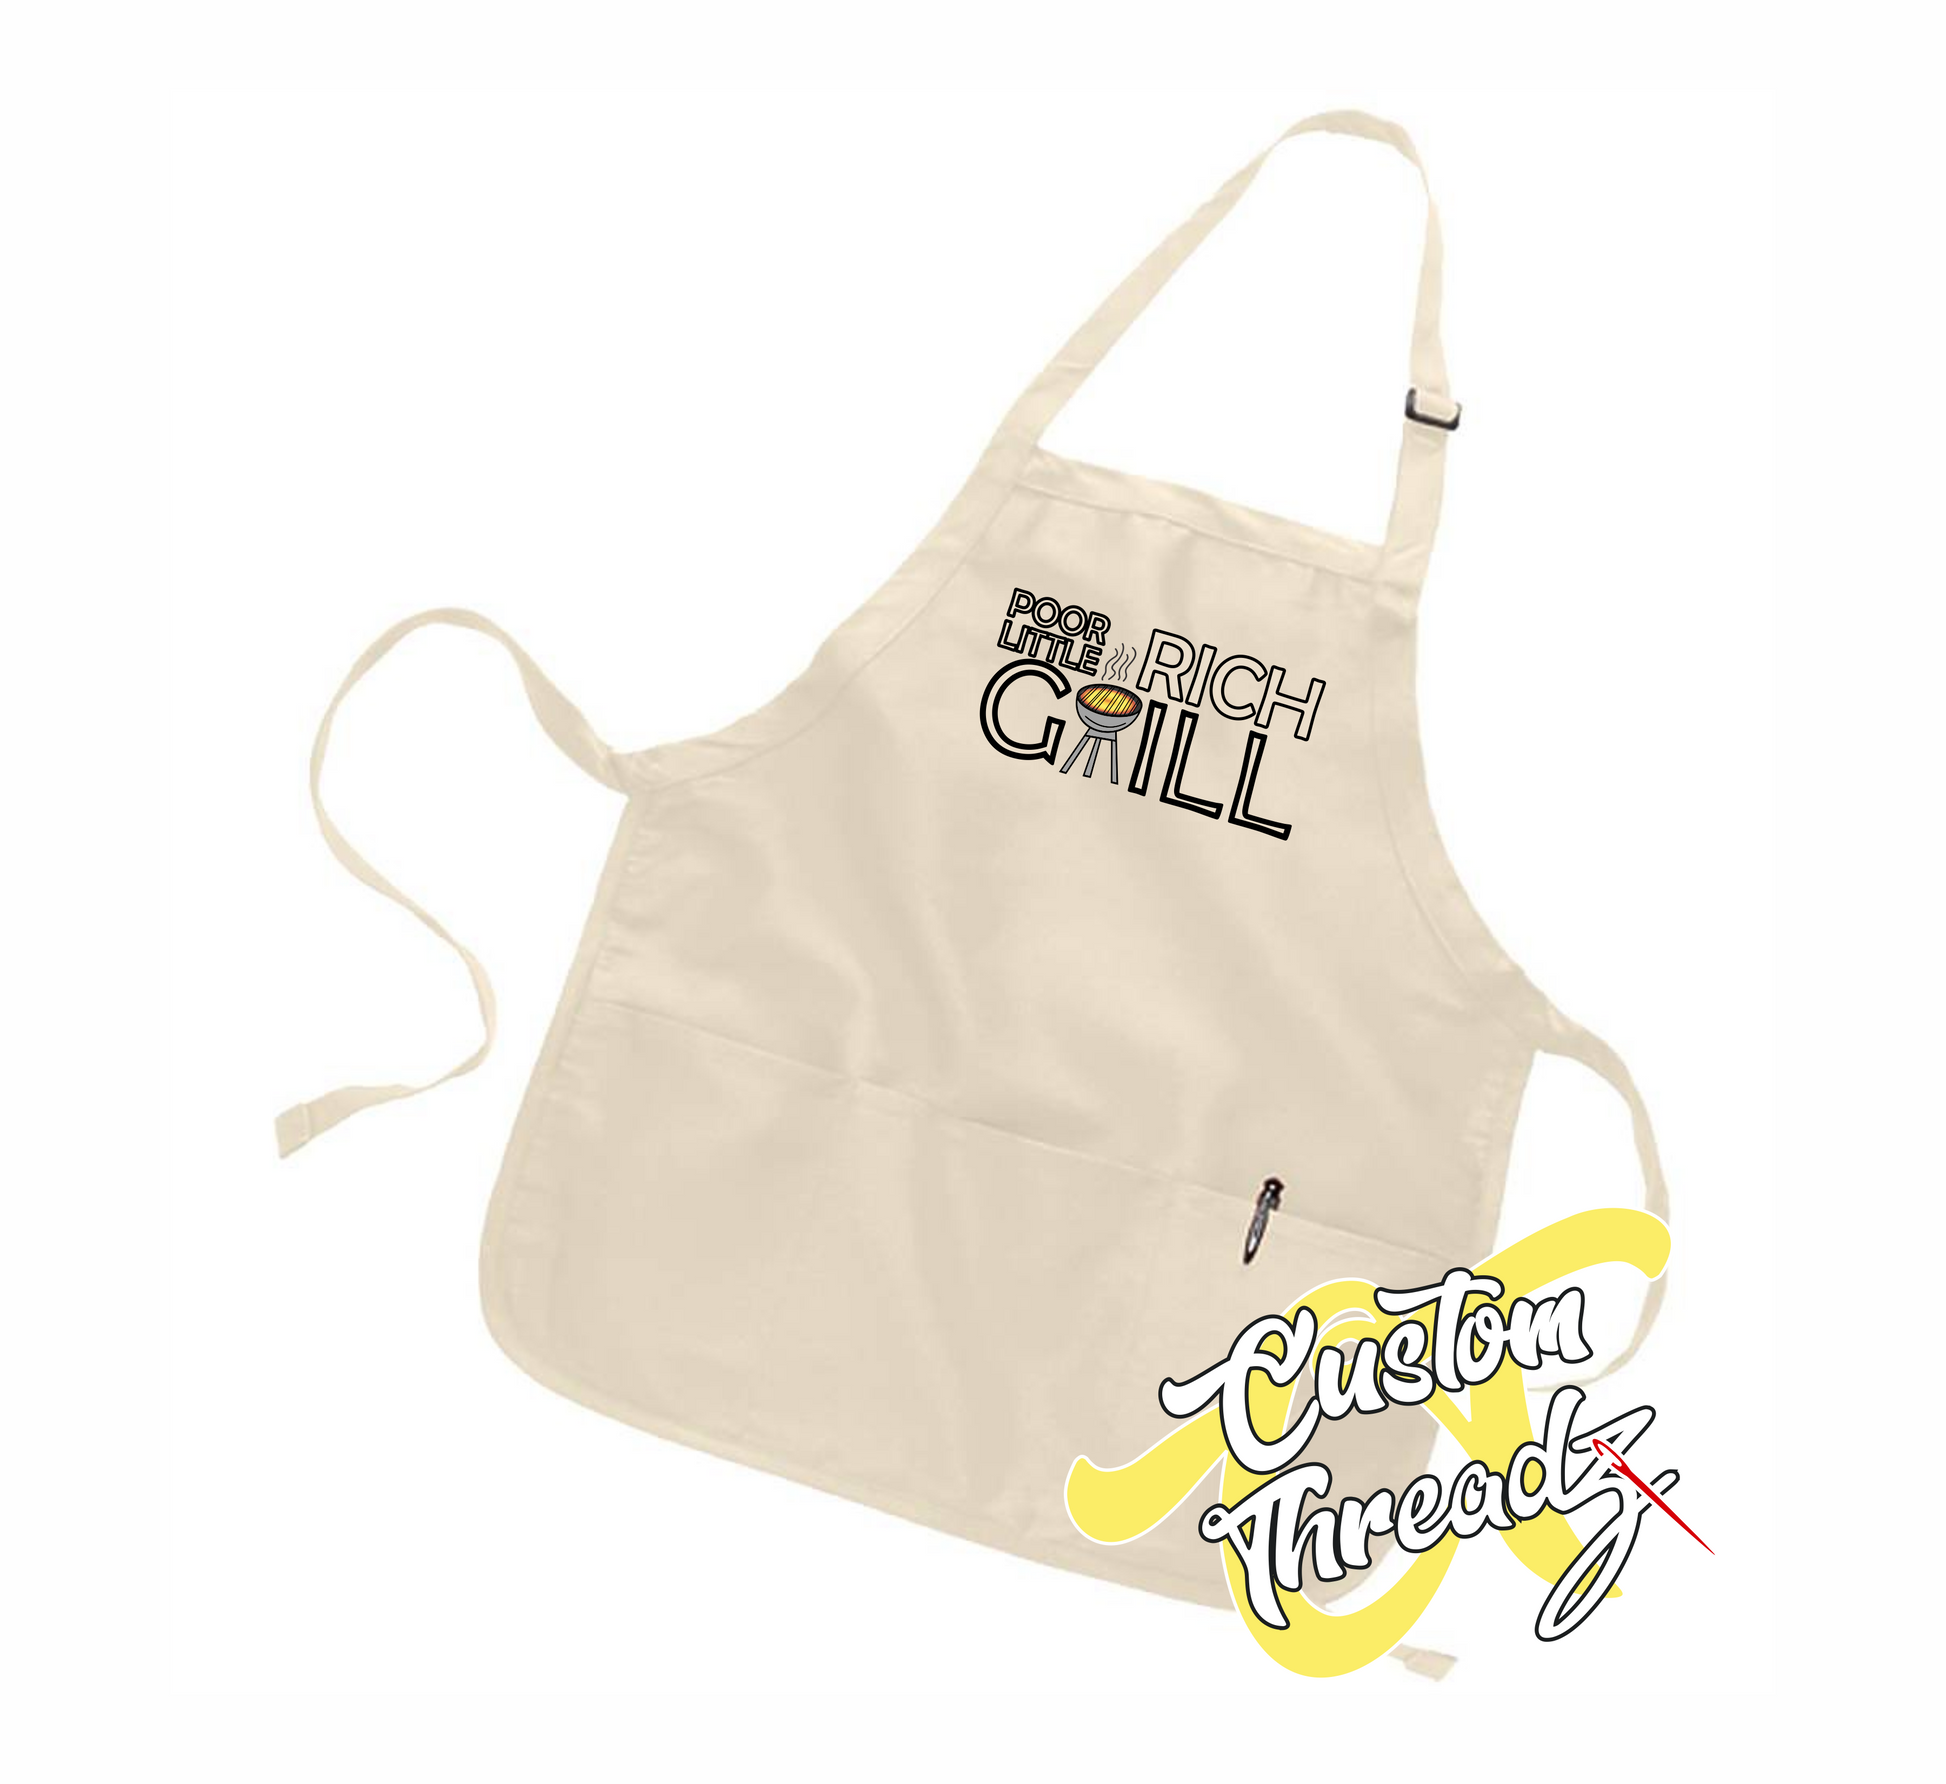 stone apron with poor little rich grill schitts creek DTG printed design